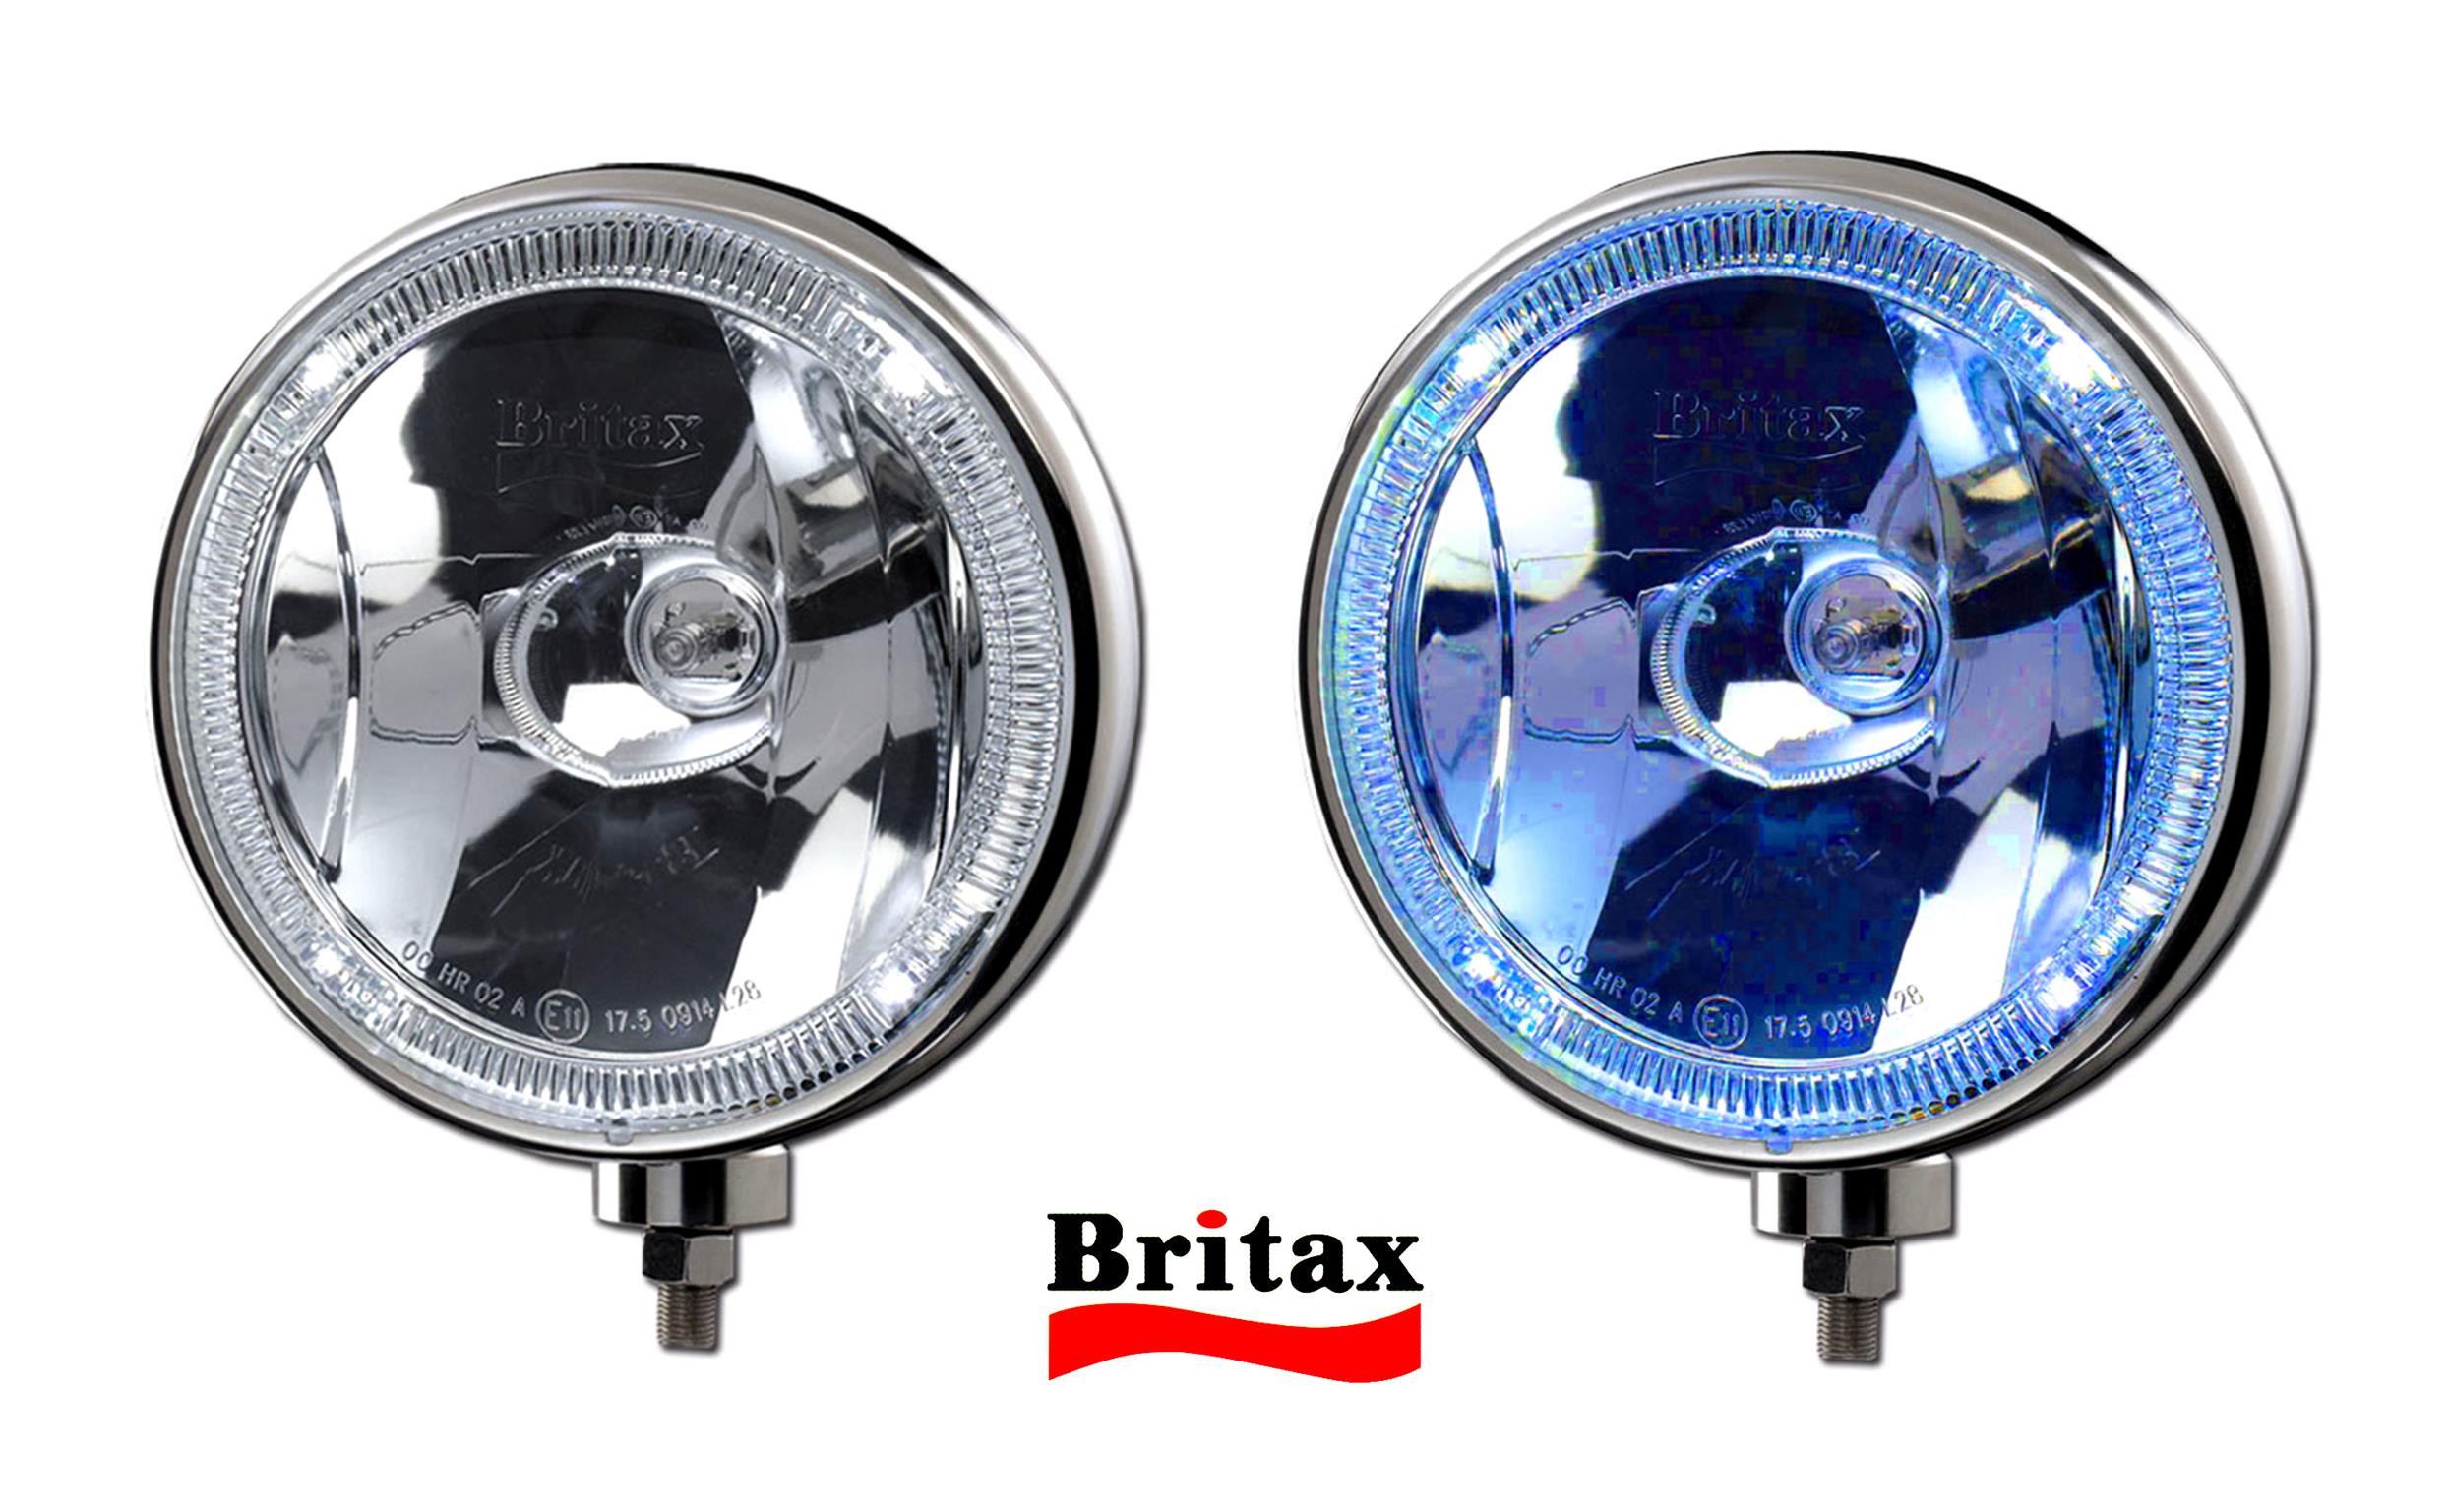 Britax 8" halogen/LED stainless driving lamp L28